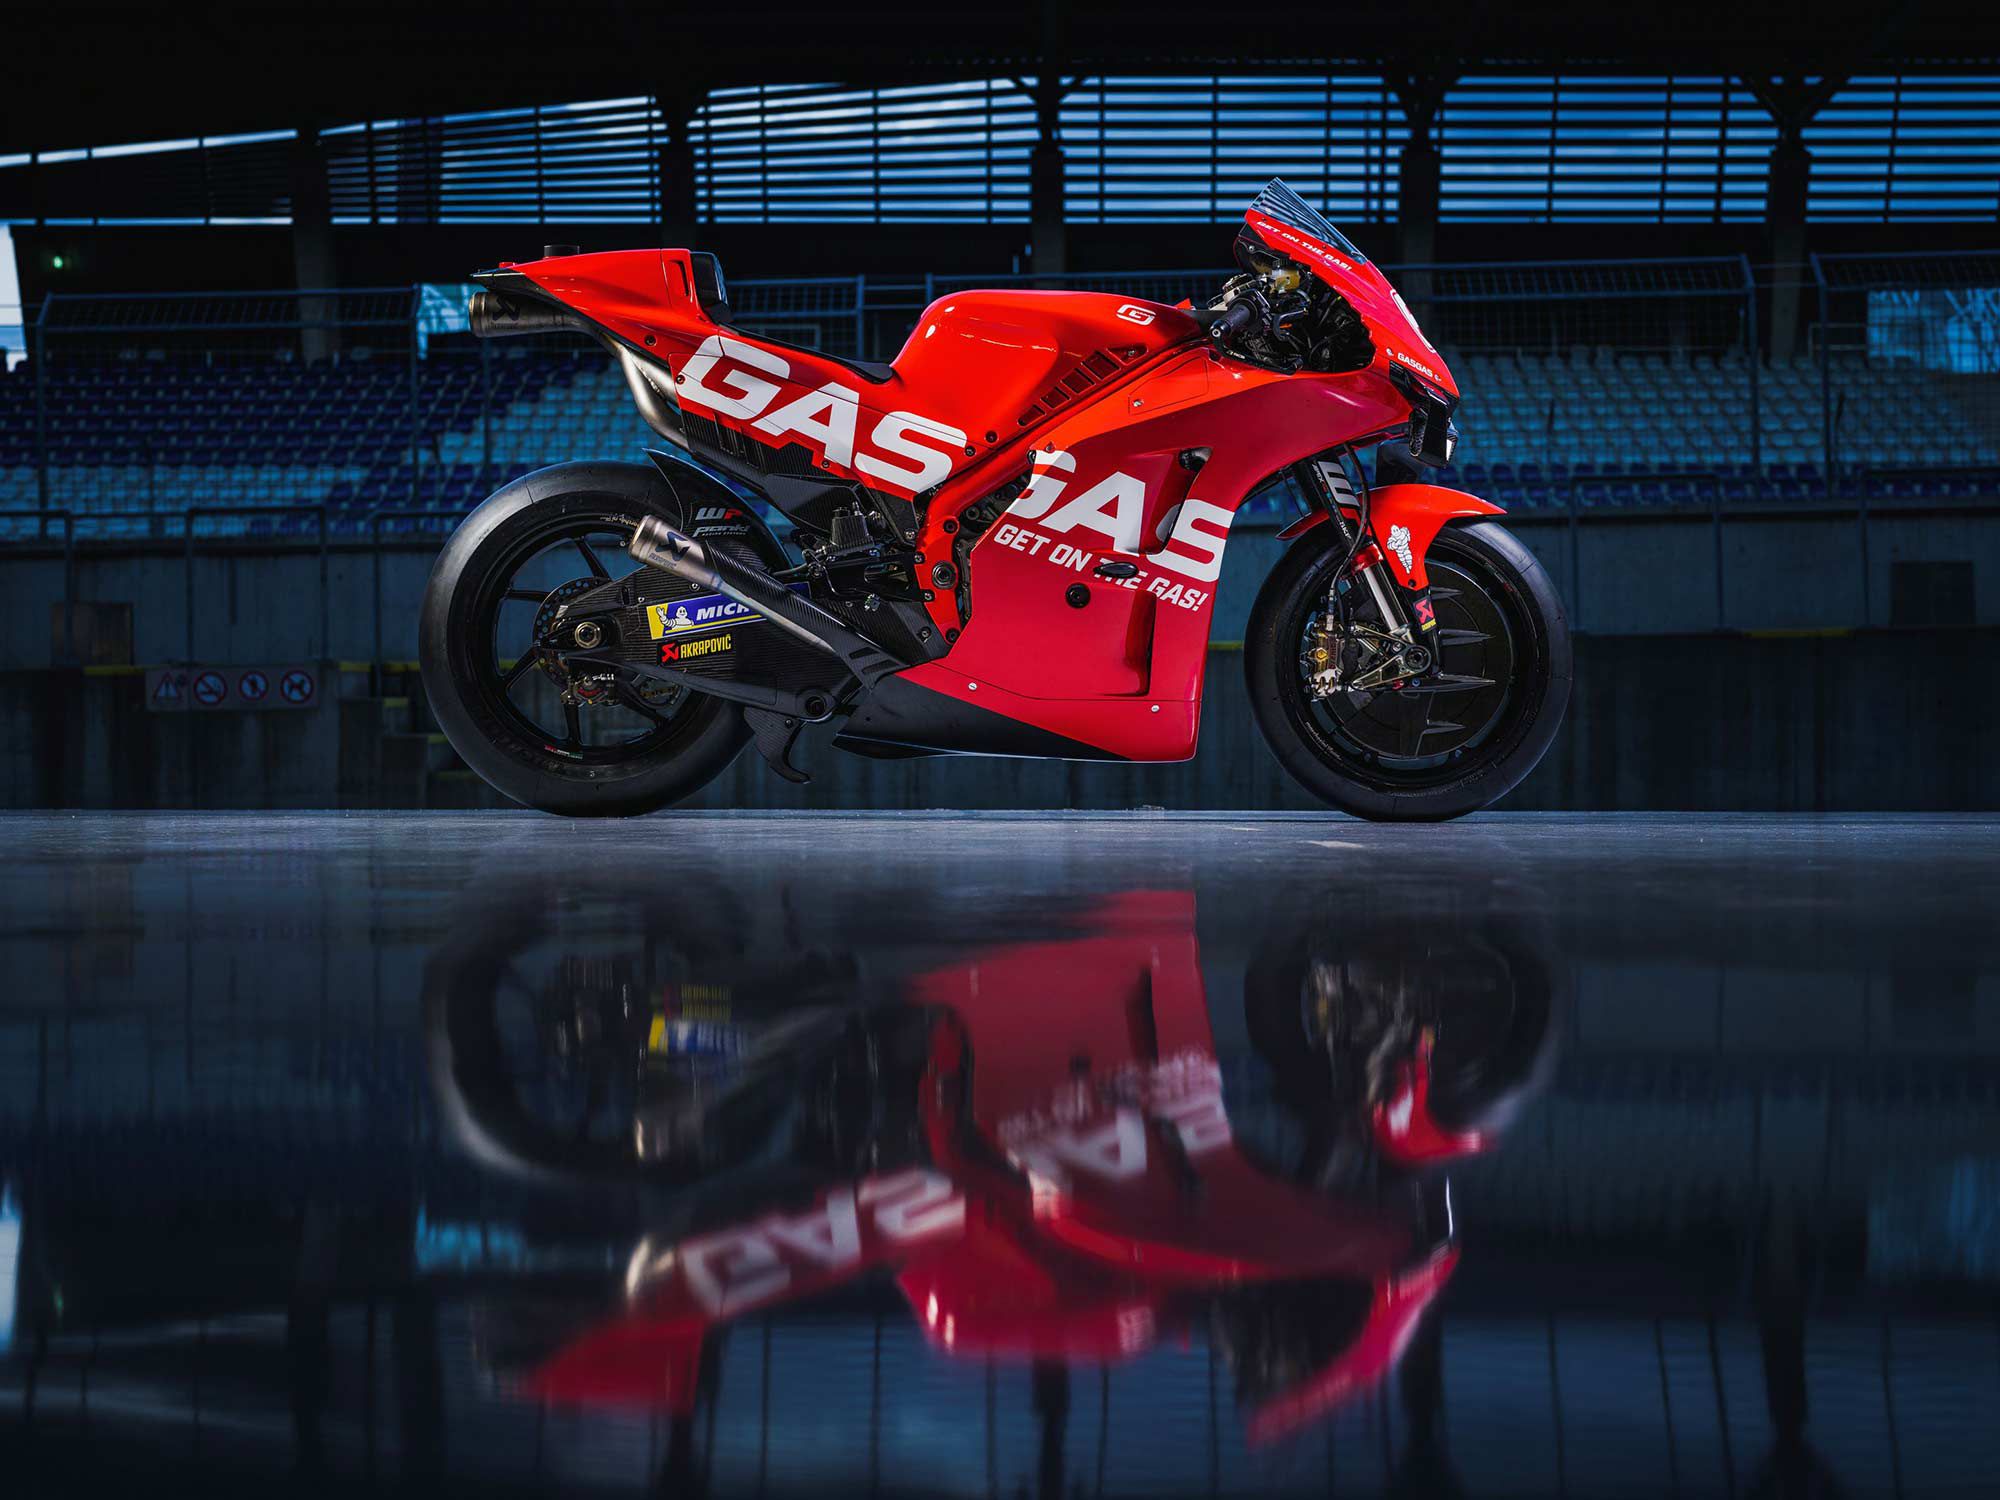 GasGas will be the sixth manufacturer on the MotoGP grid in 2023.